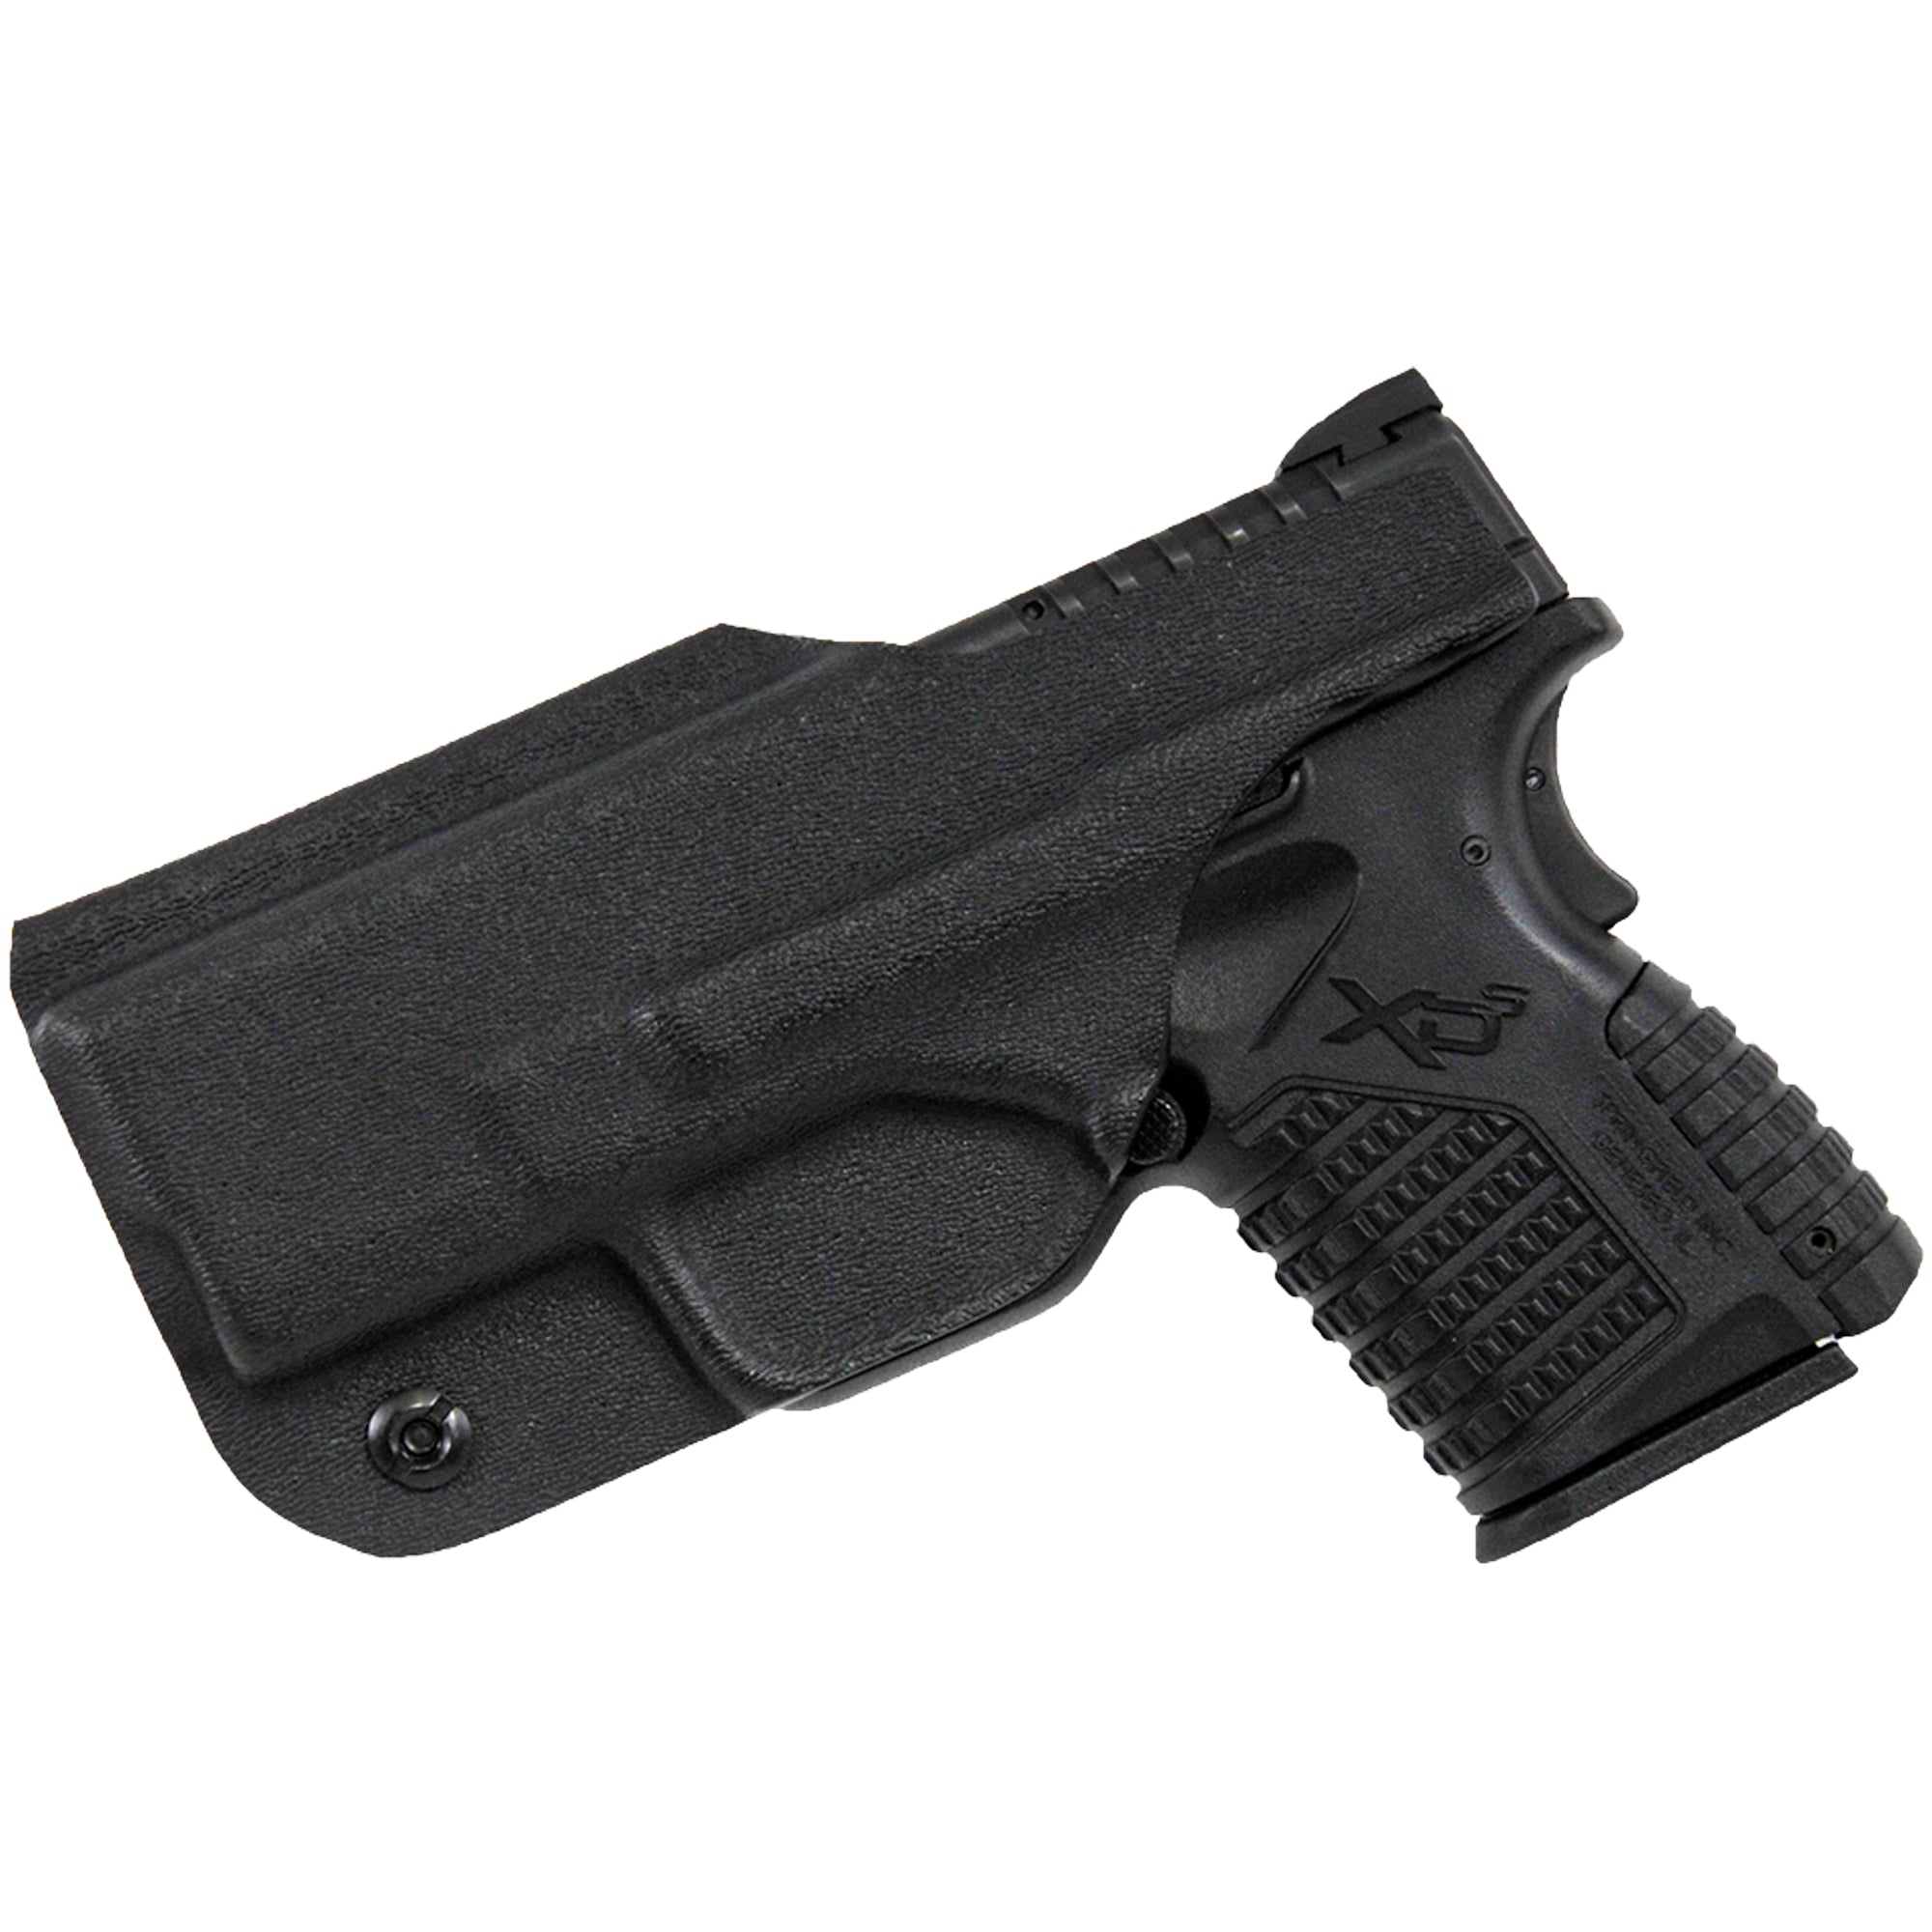 Springfield XD-S 3.3'' IWB Kydex Holster & Mag Pouch Combo